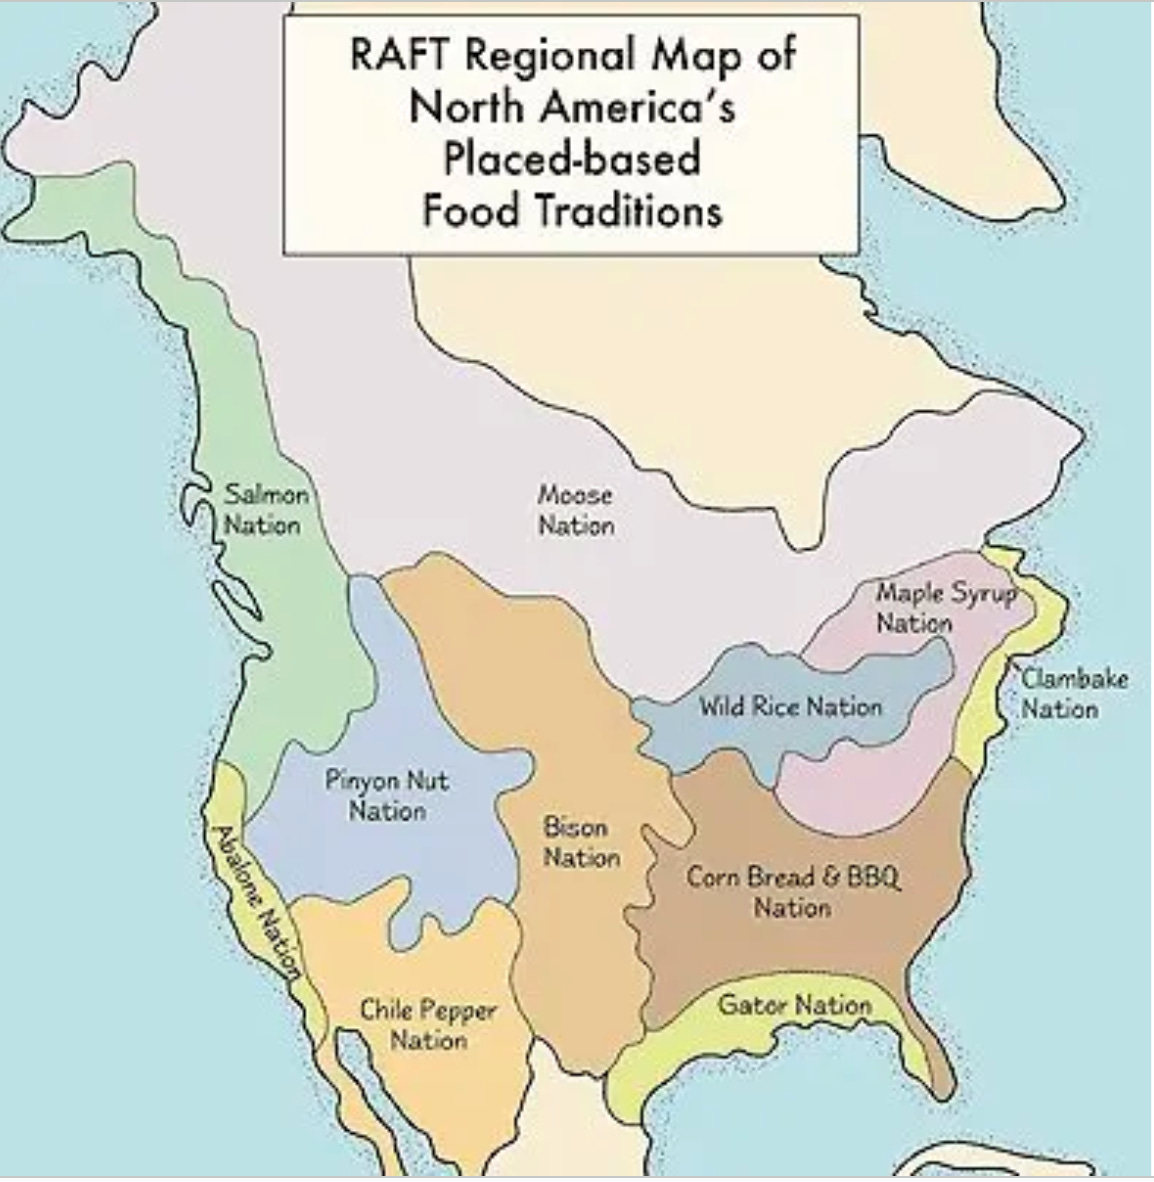 A map of North America's traditional food cultures, including names like Wild Rice Nation, Maple Syrup Nation, Clambake Nation, Gator Nation, Bison Nation, and Chile Pepper Nation